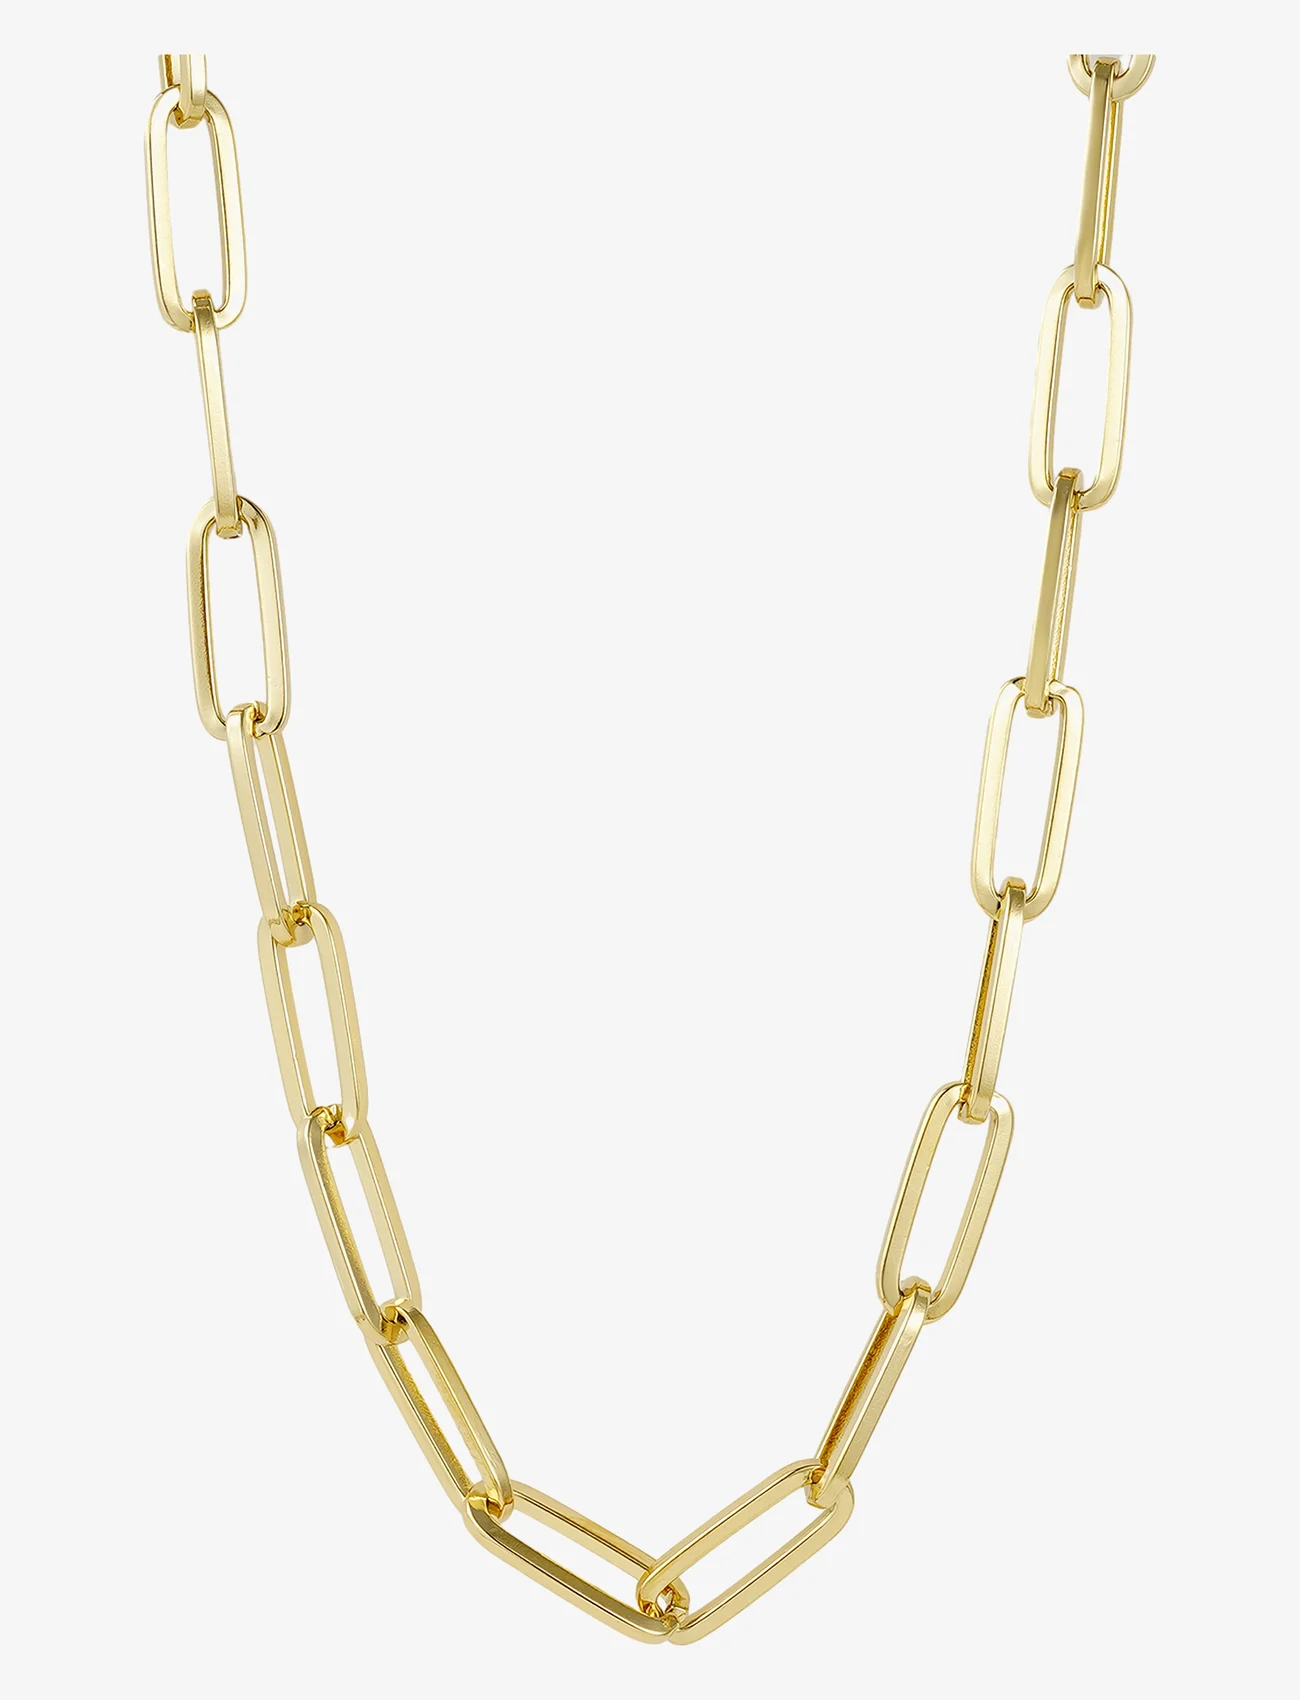 Bud to rose - Carrie Large Necklace - festmode zu outlet-preisen - gold - 0